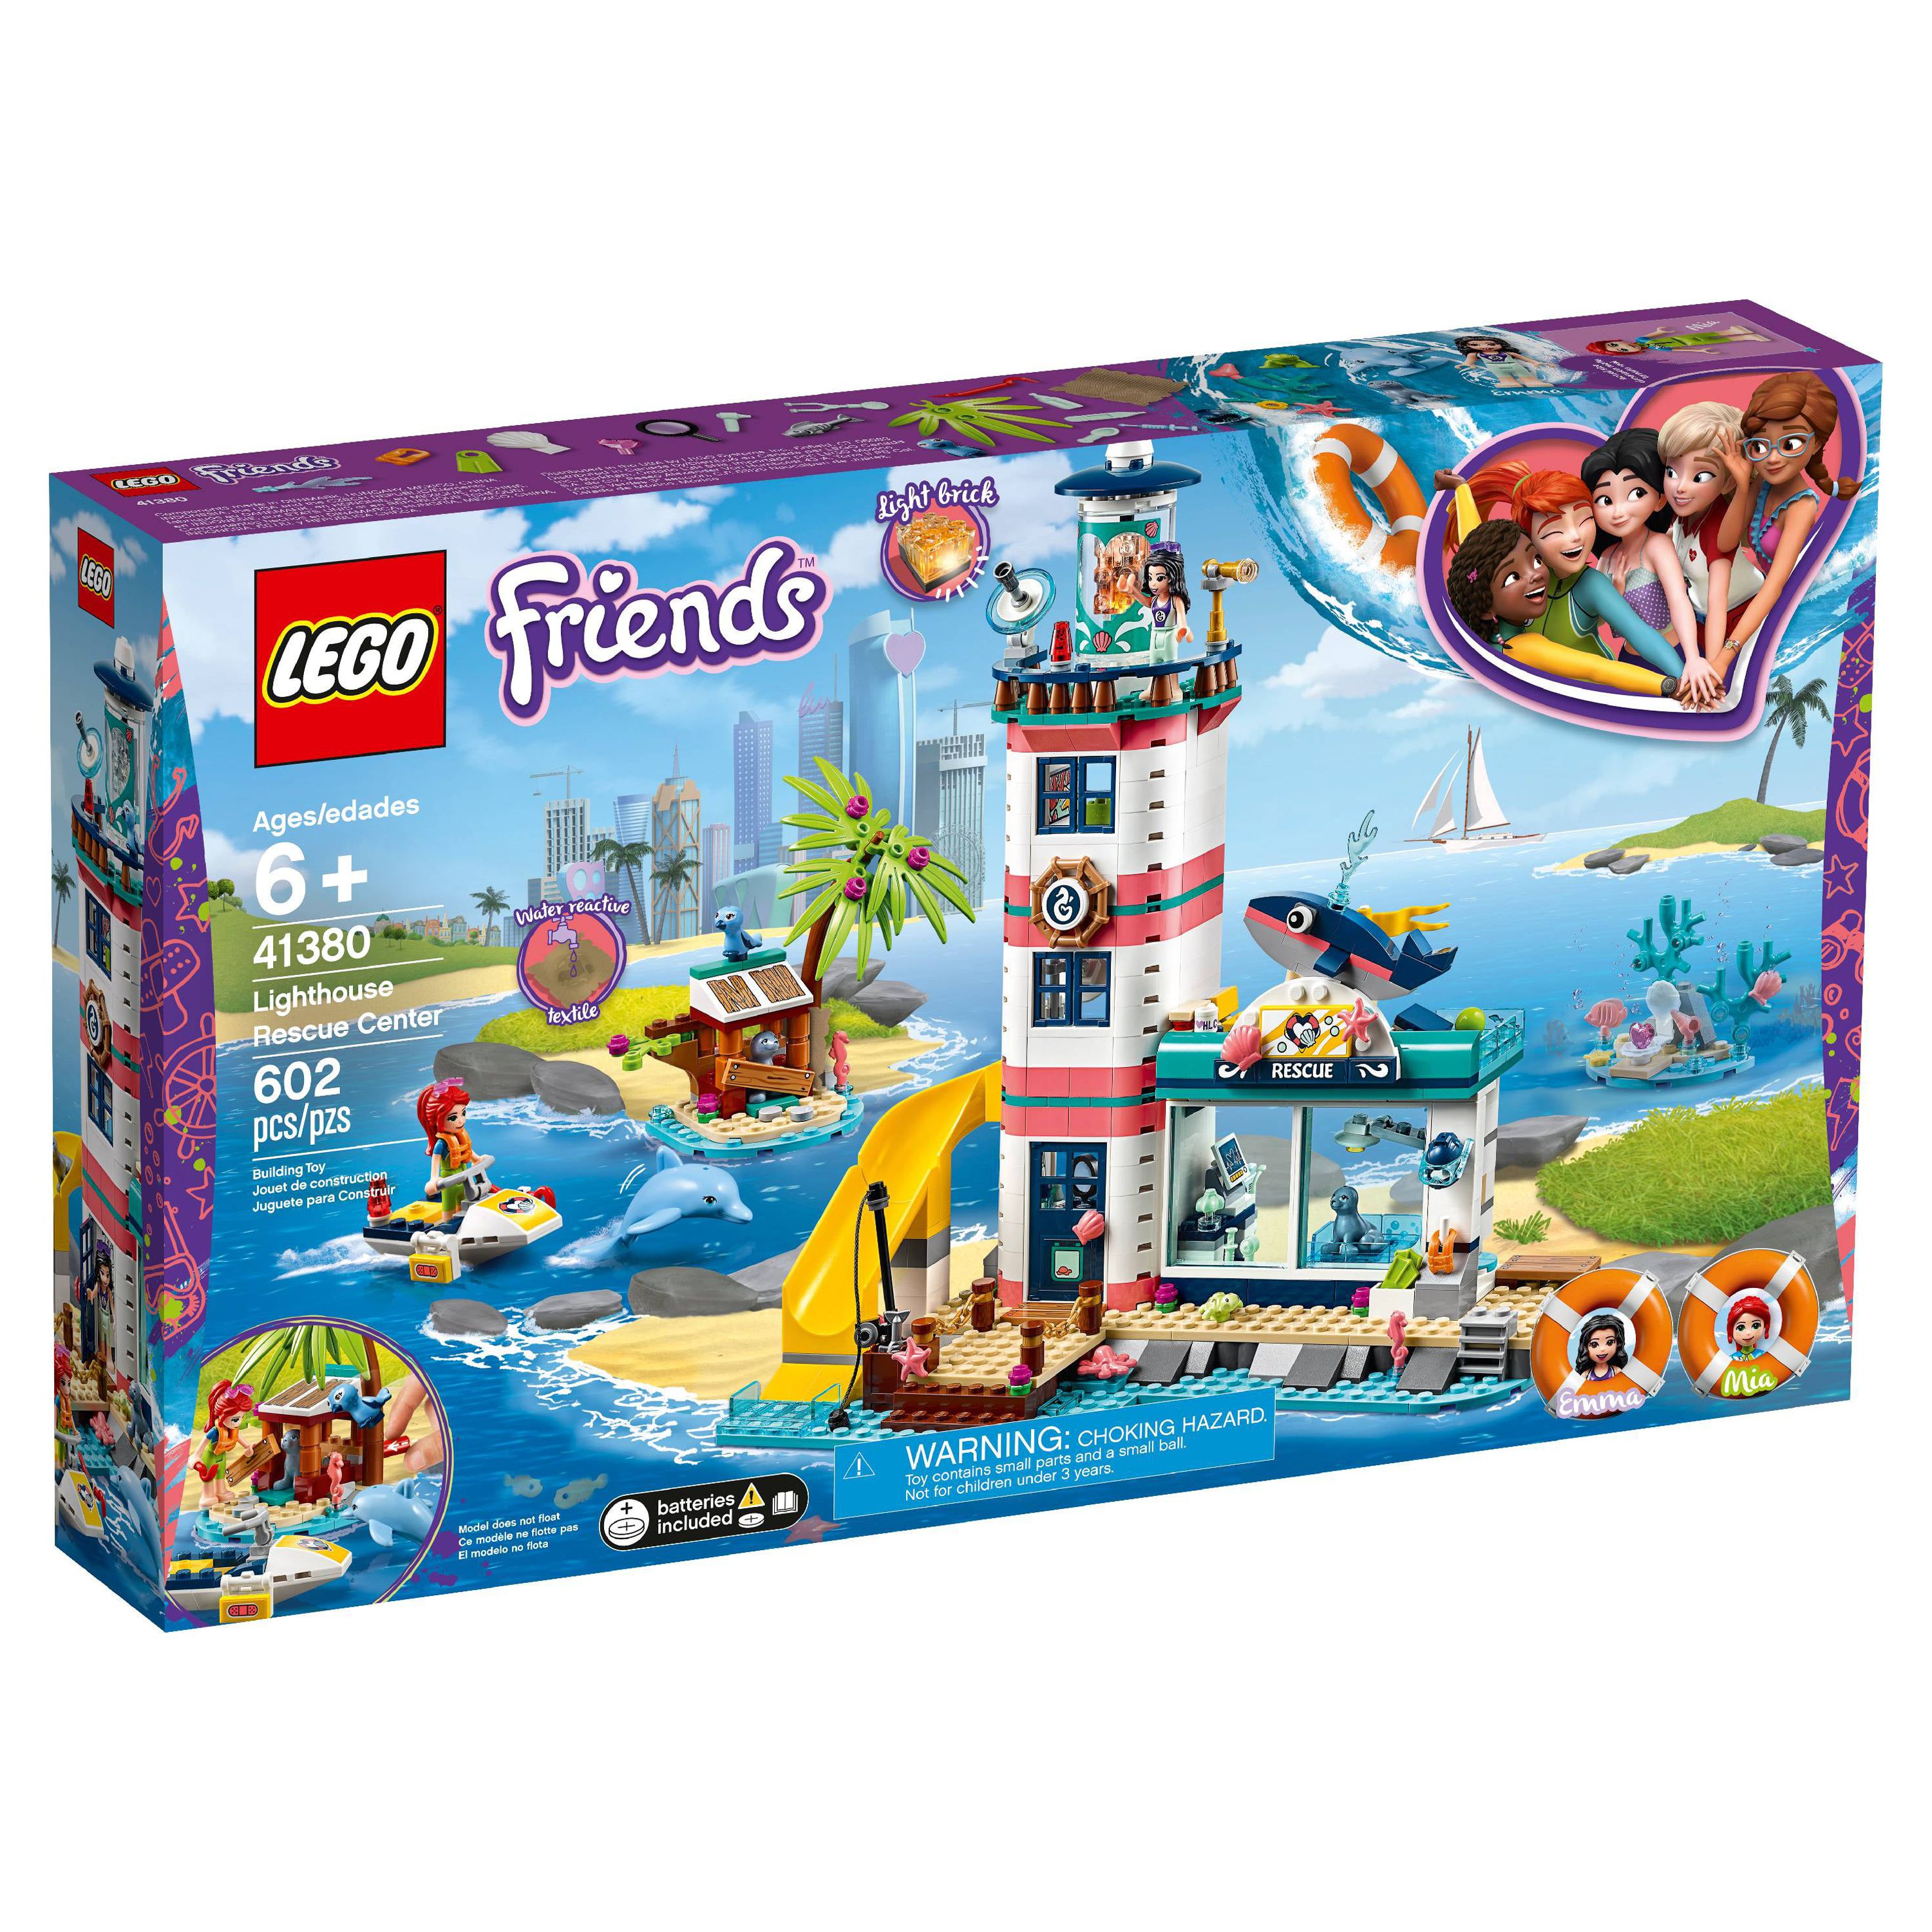 LEGO Friends Lighthouse Rescue Center 41380 Building Kit (602 Pieces) - image 5 of 8